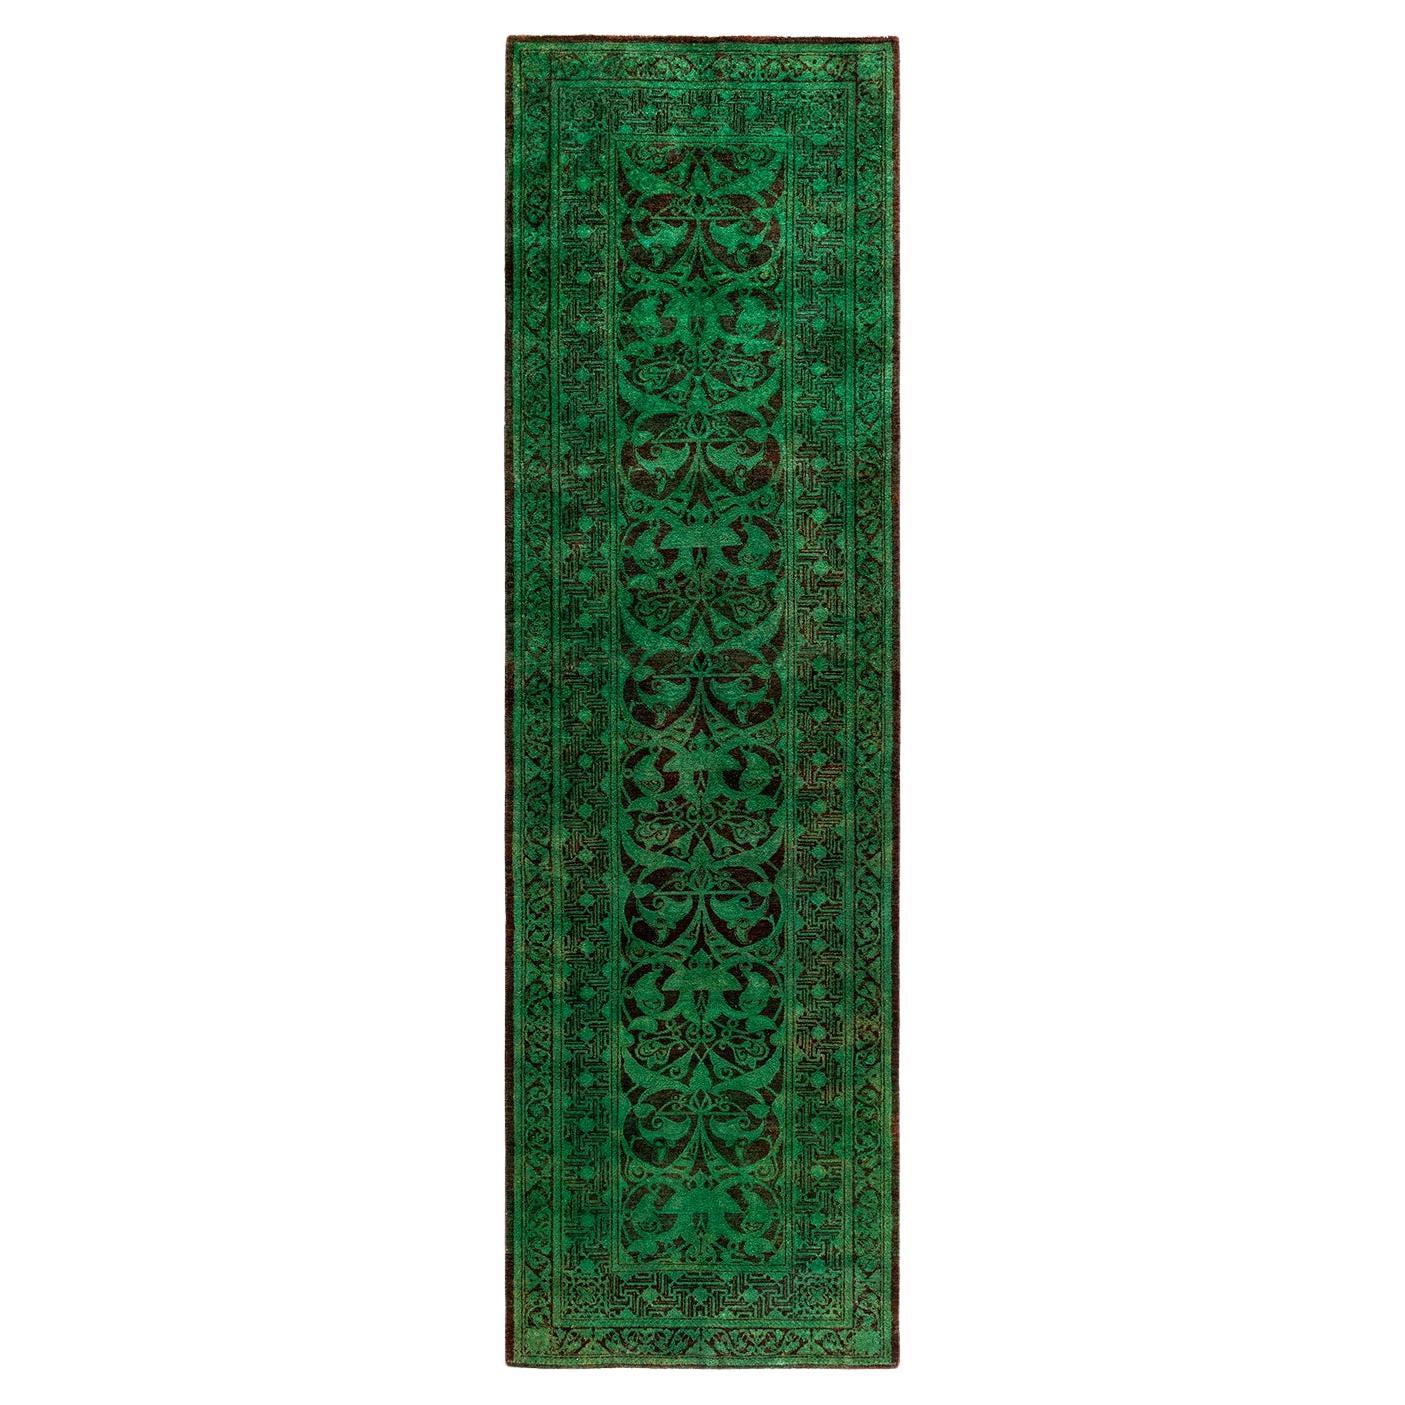 Contemporary Fine Vibrance Hand Knotted Wool Green Runner